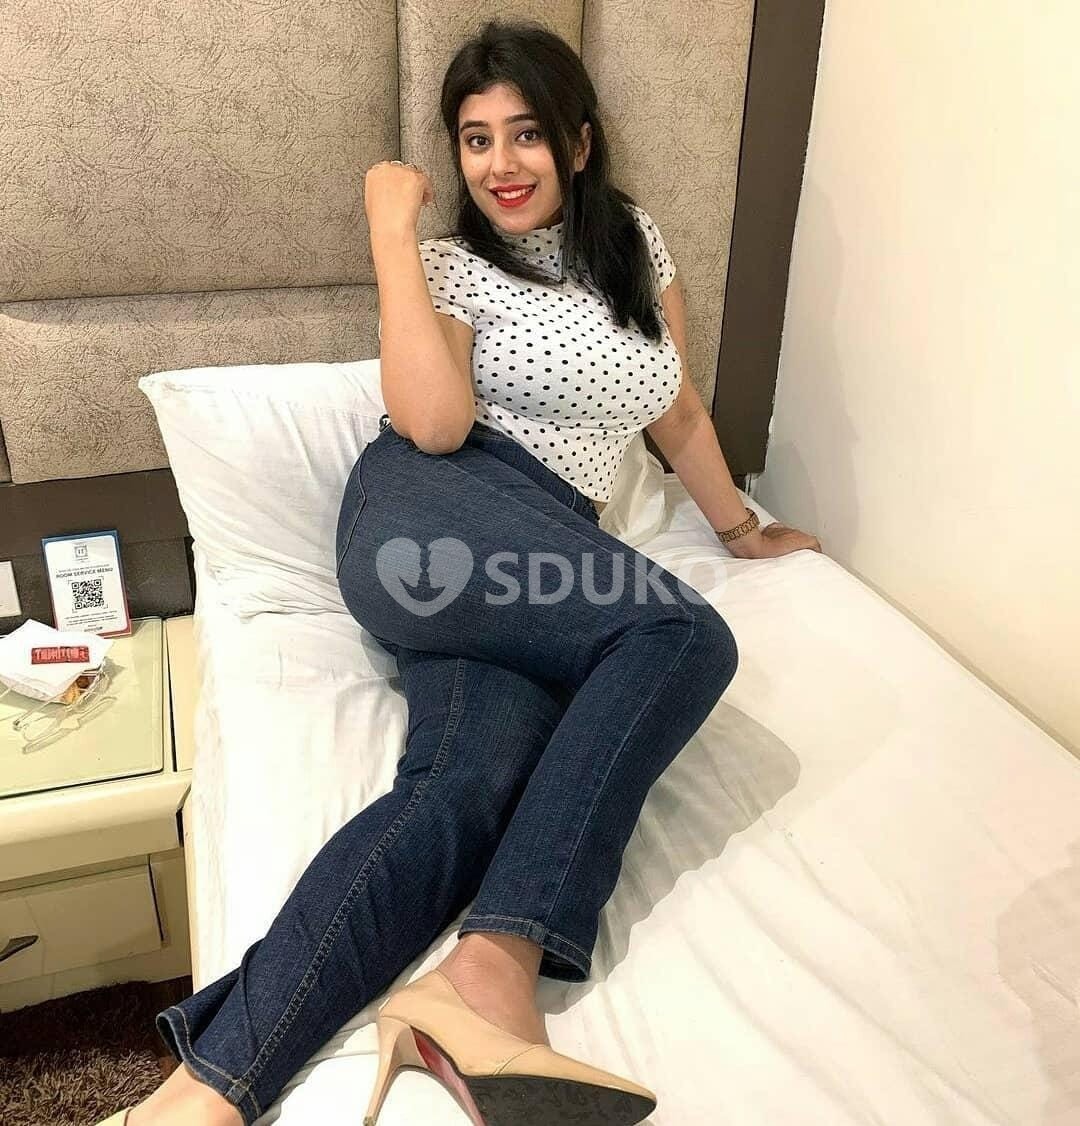 Hyderabad lb nagar  low price 100% guaranteed hot figure best high profile full safe and secure today low price college 